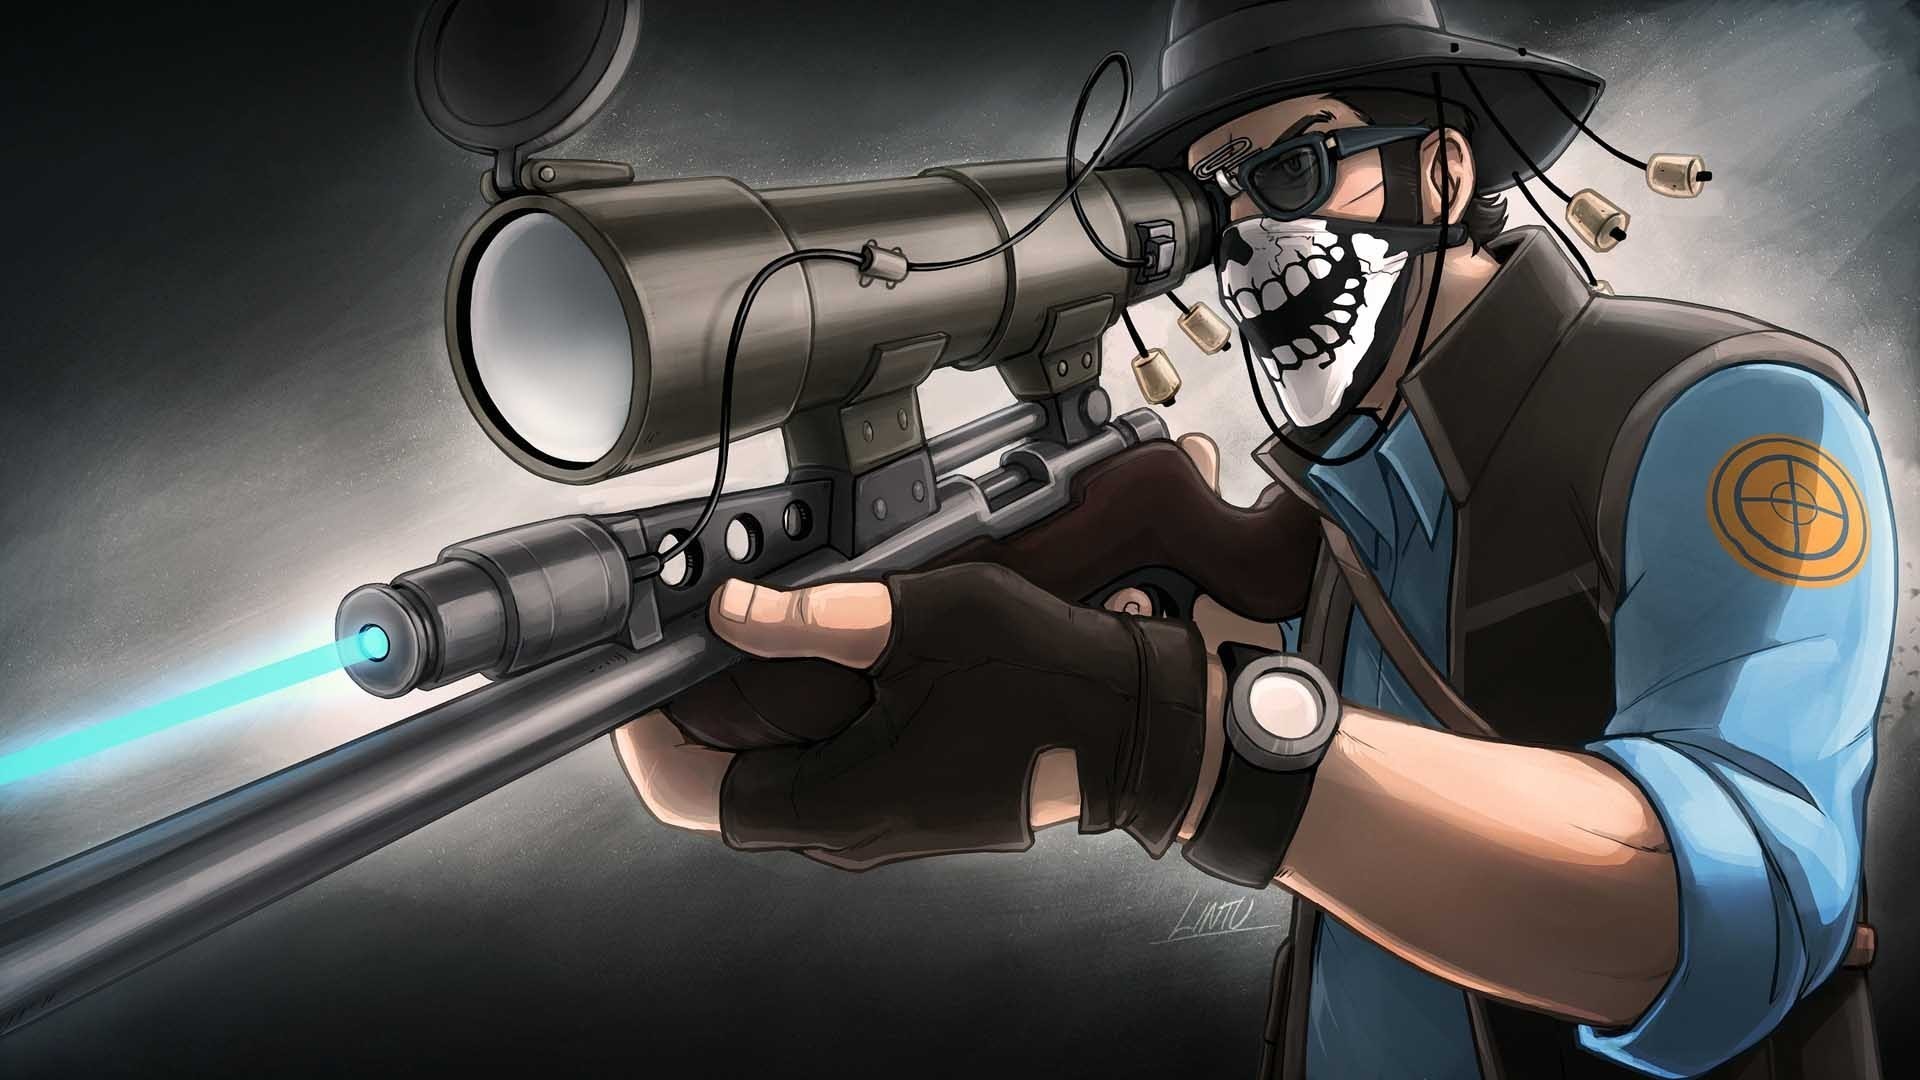 1920x1080 Team Fortress 2 Squad iPhone 4 Wallpaper | Epic Car Wallpapers | Pinterest